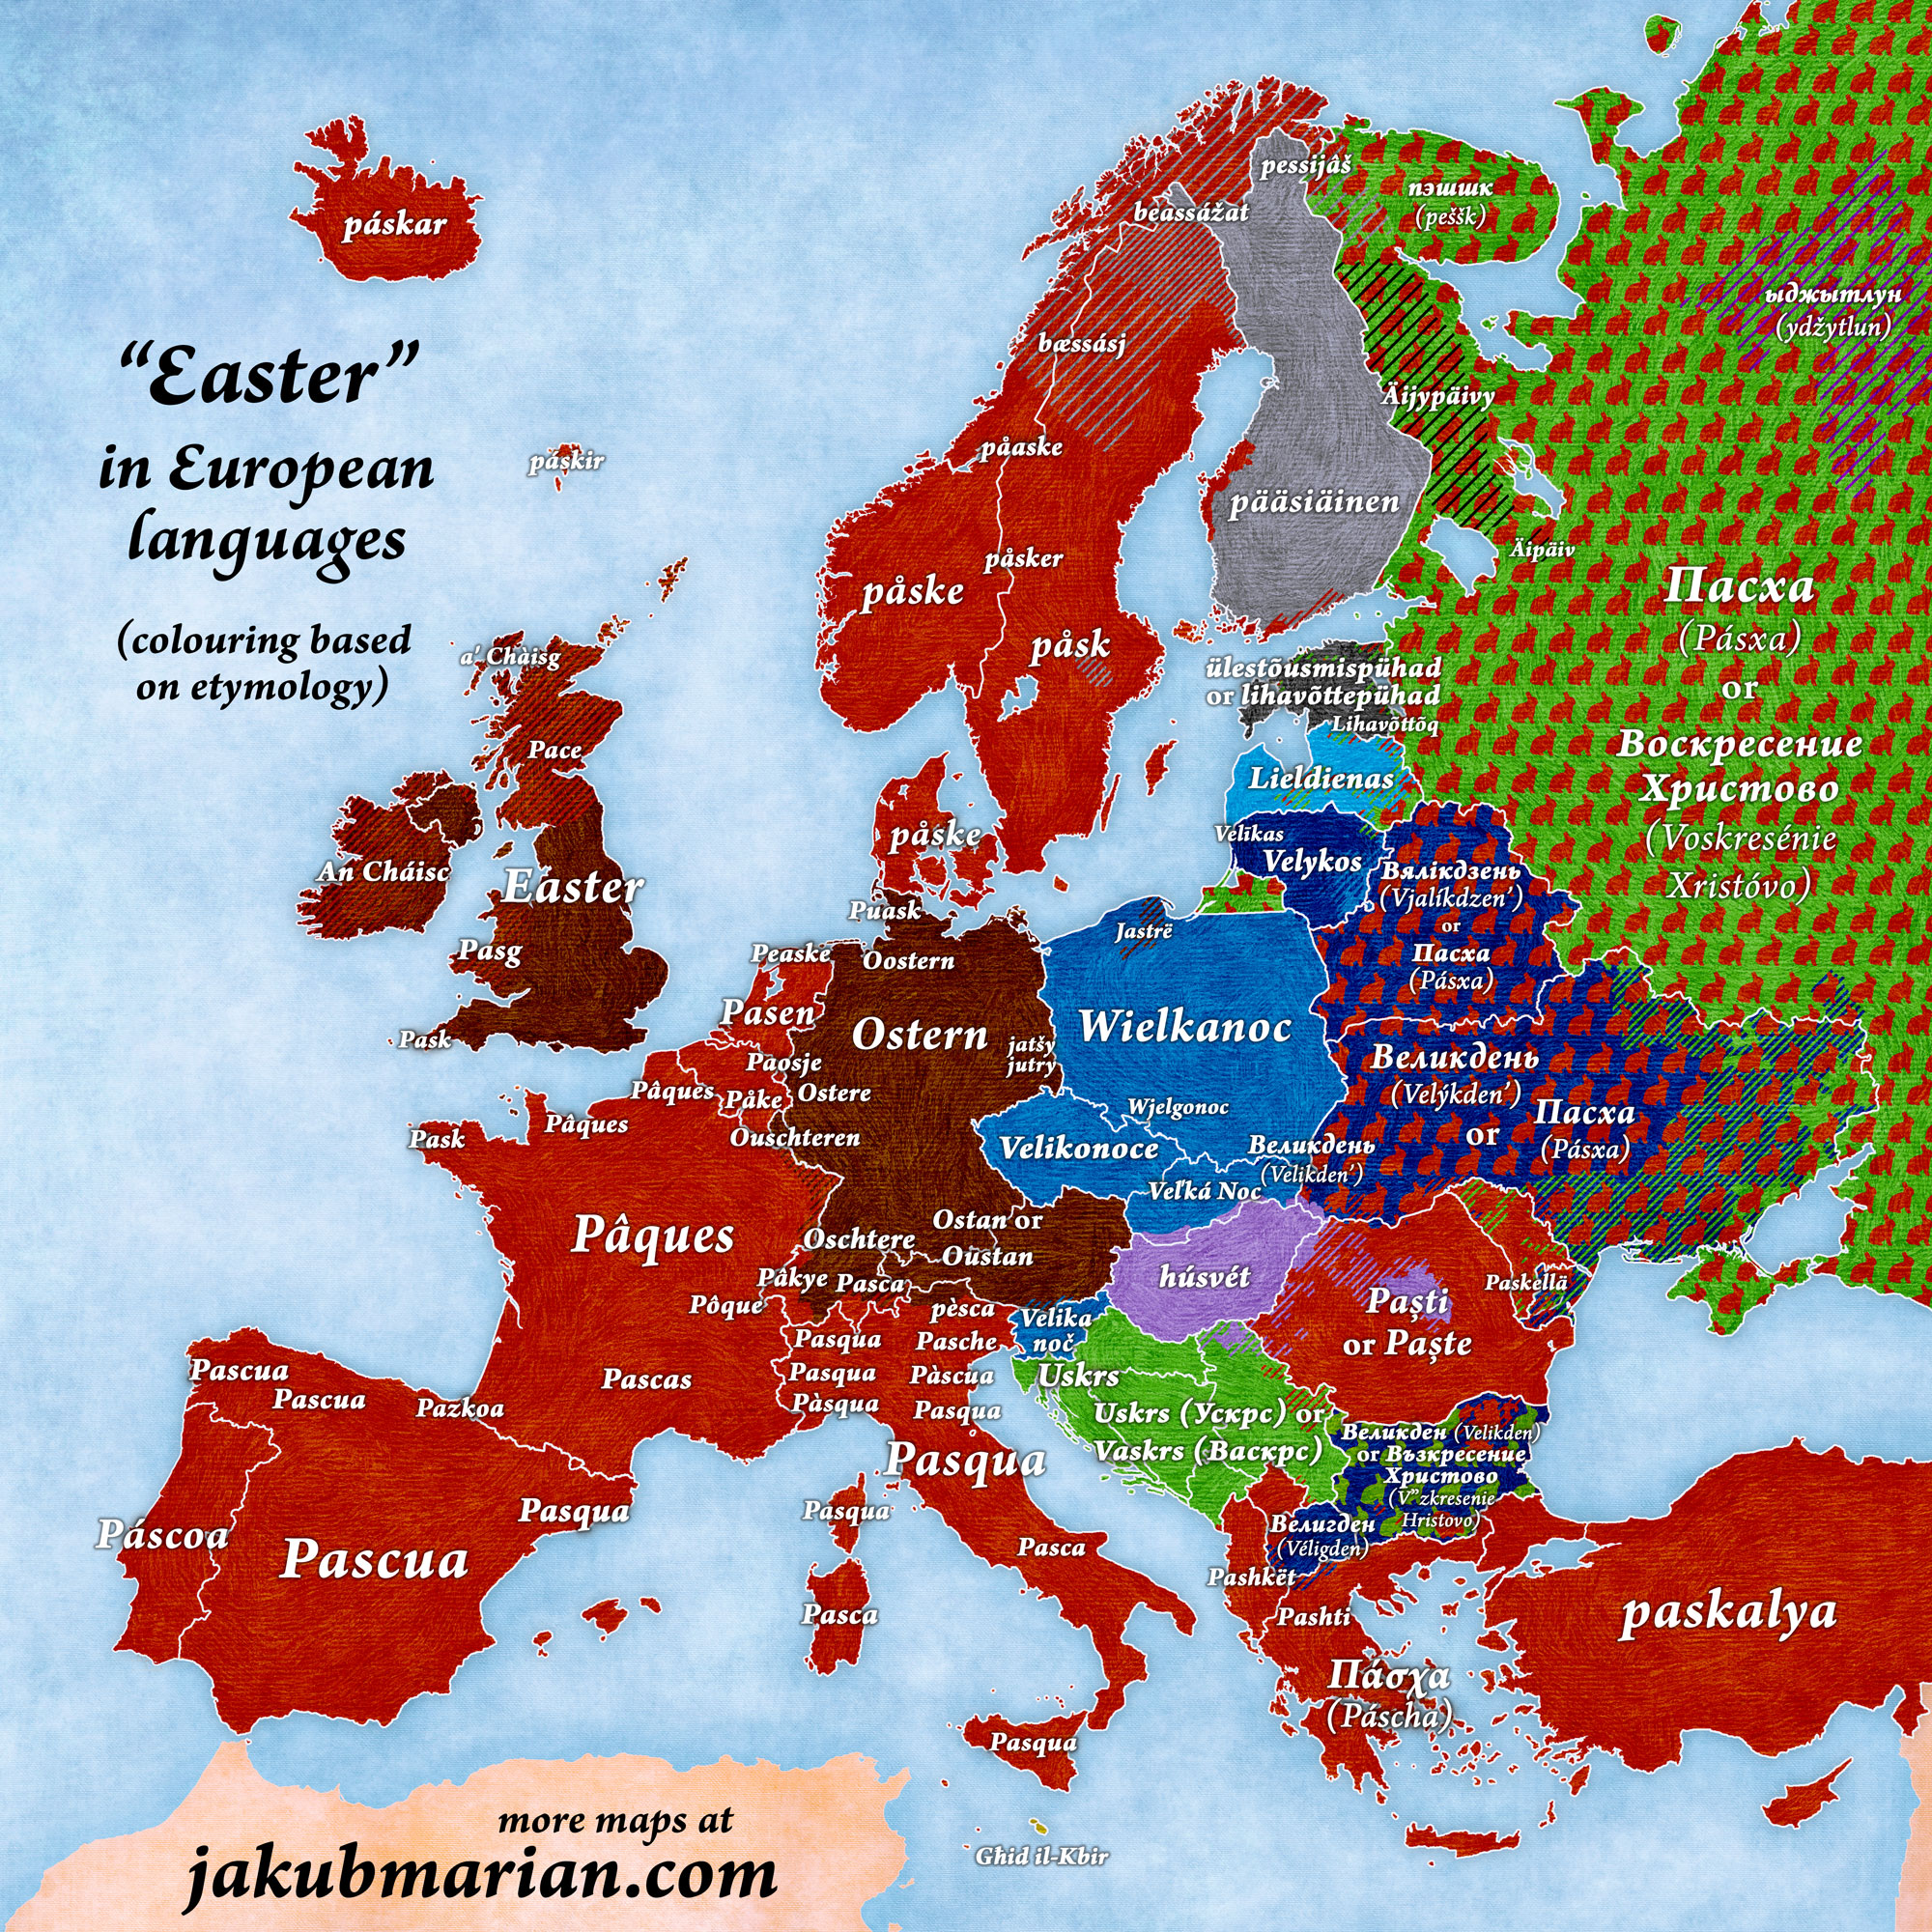 Easter in European languages